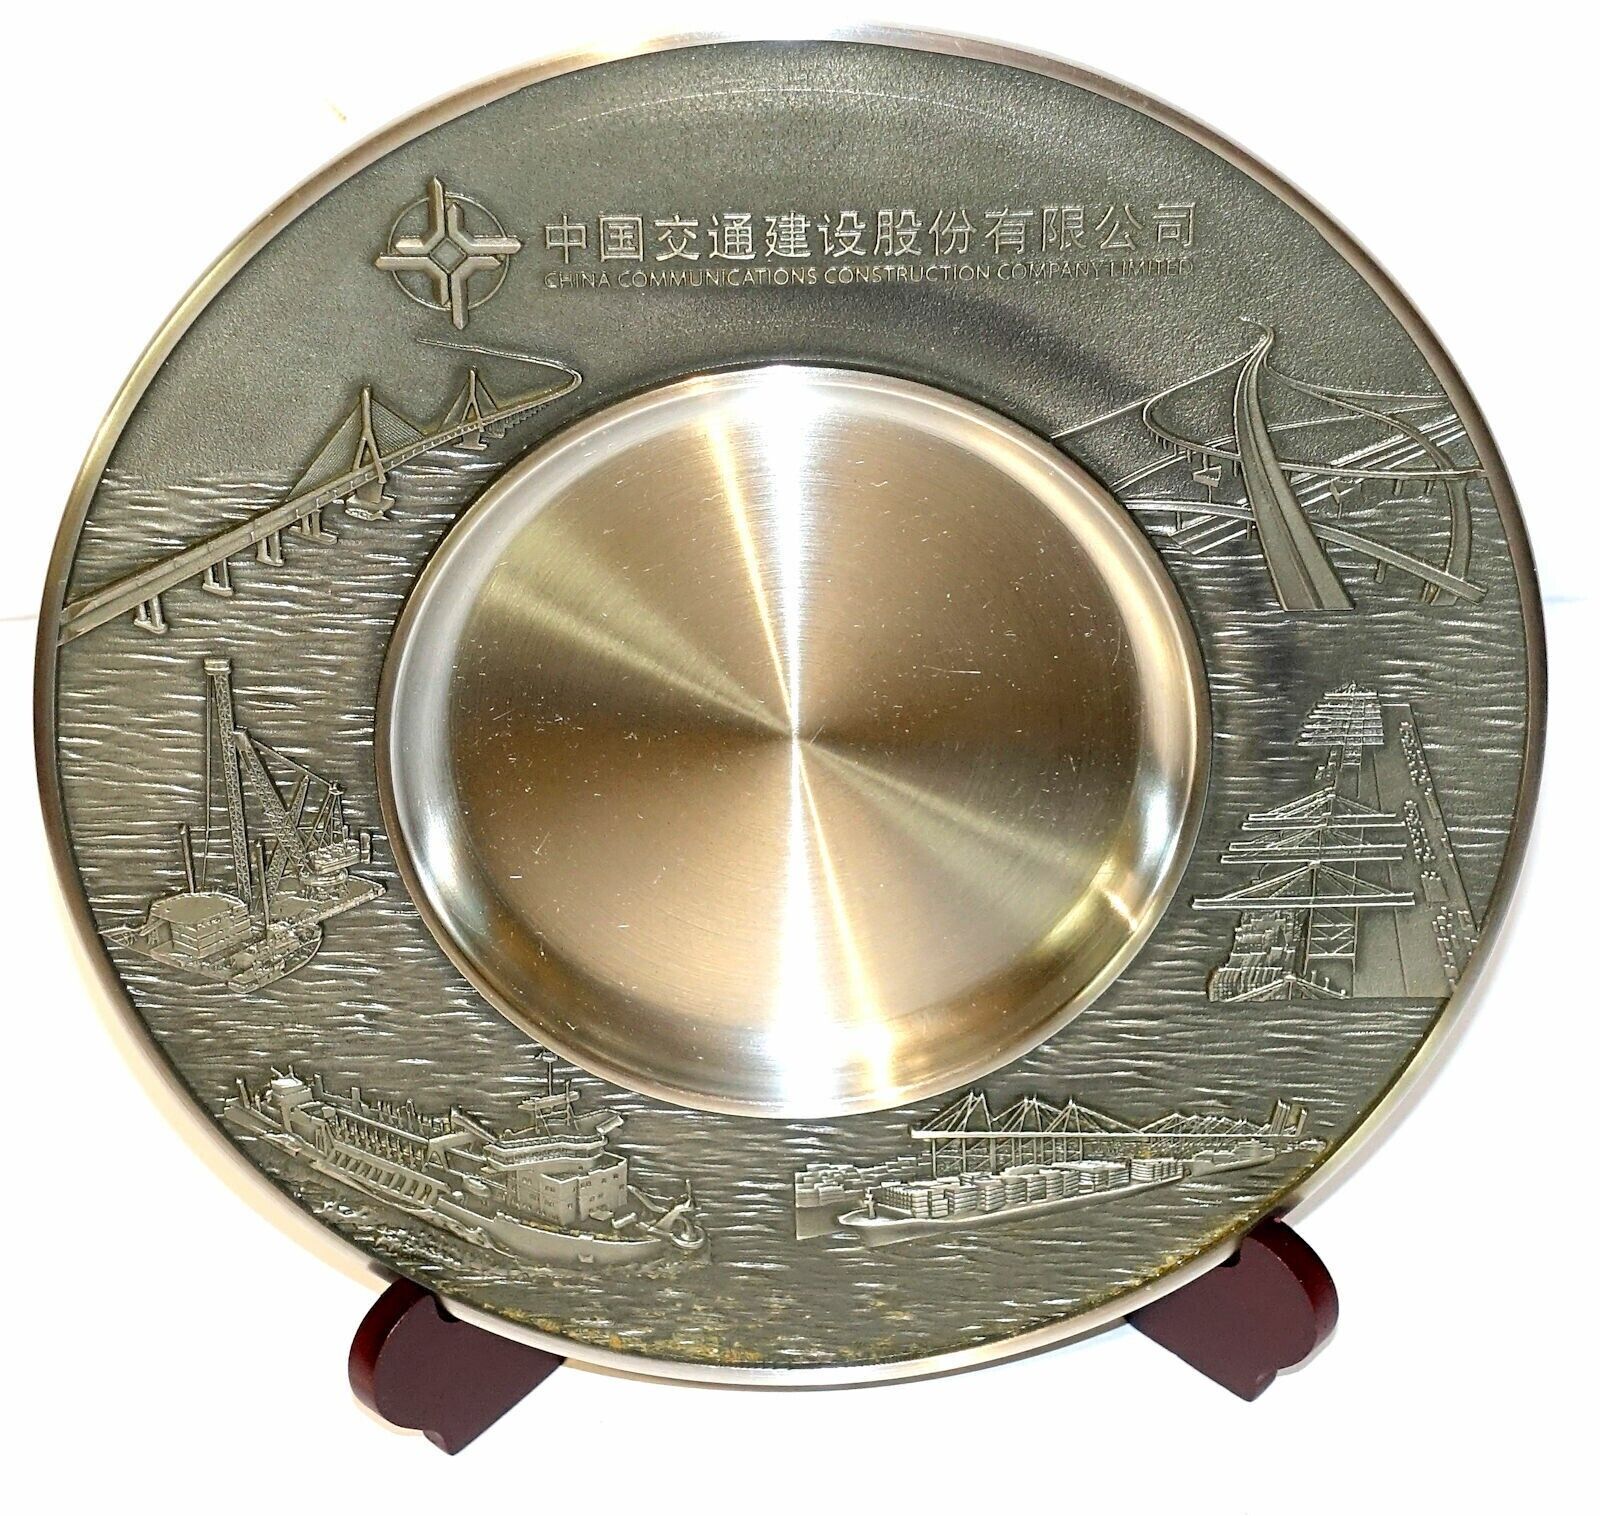 Limited Edition Chinese Pewter Plate with Stand in Original Presentation Box